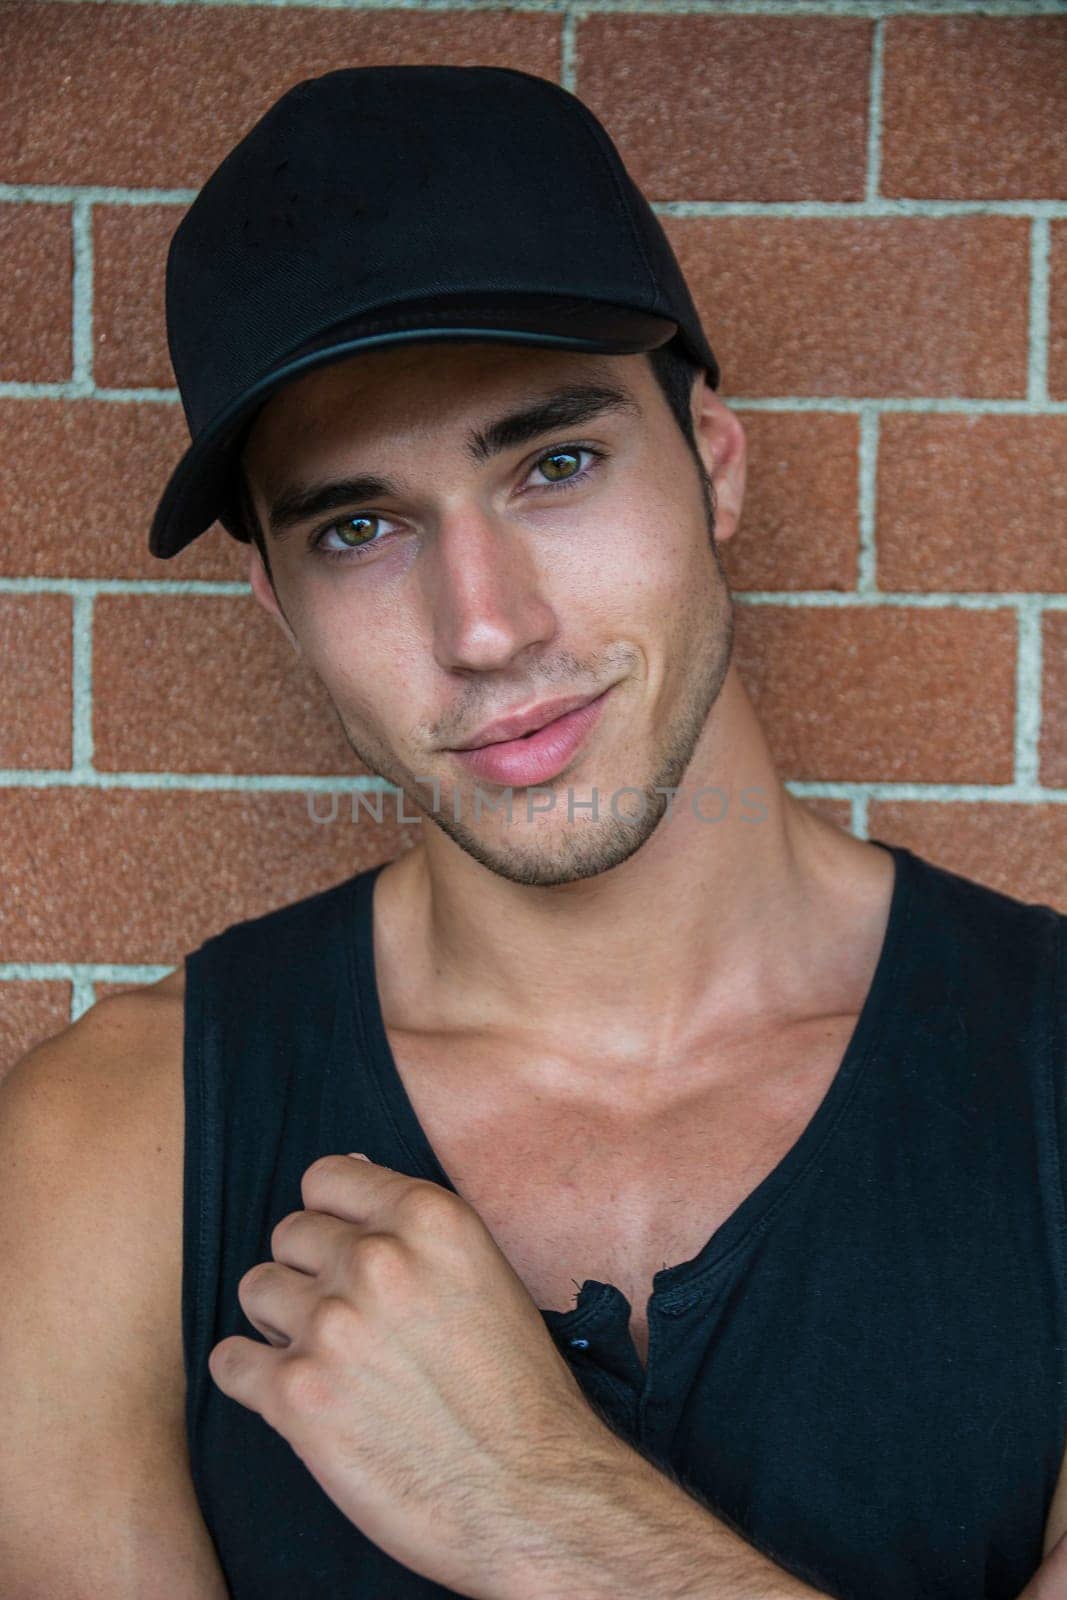 Photo of a stylish and handsome young man wearing a black shirt and hat by artofphoto